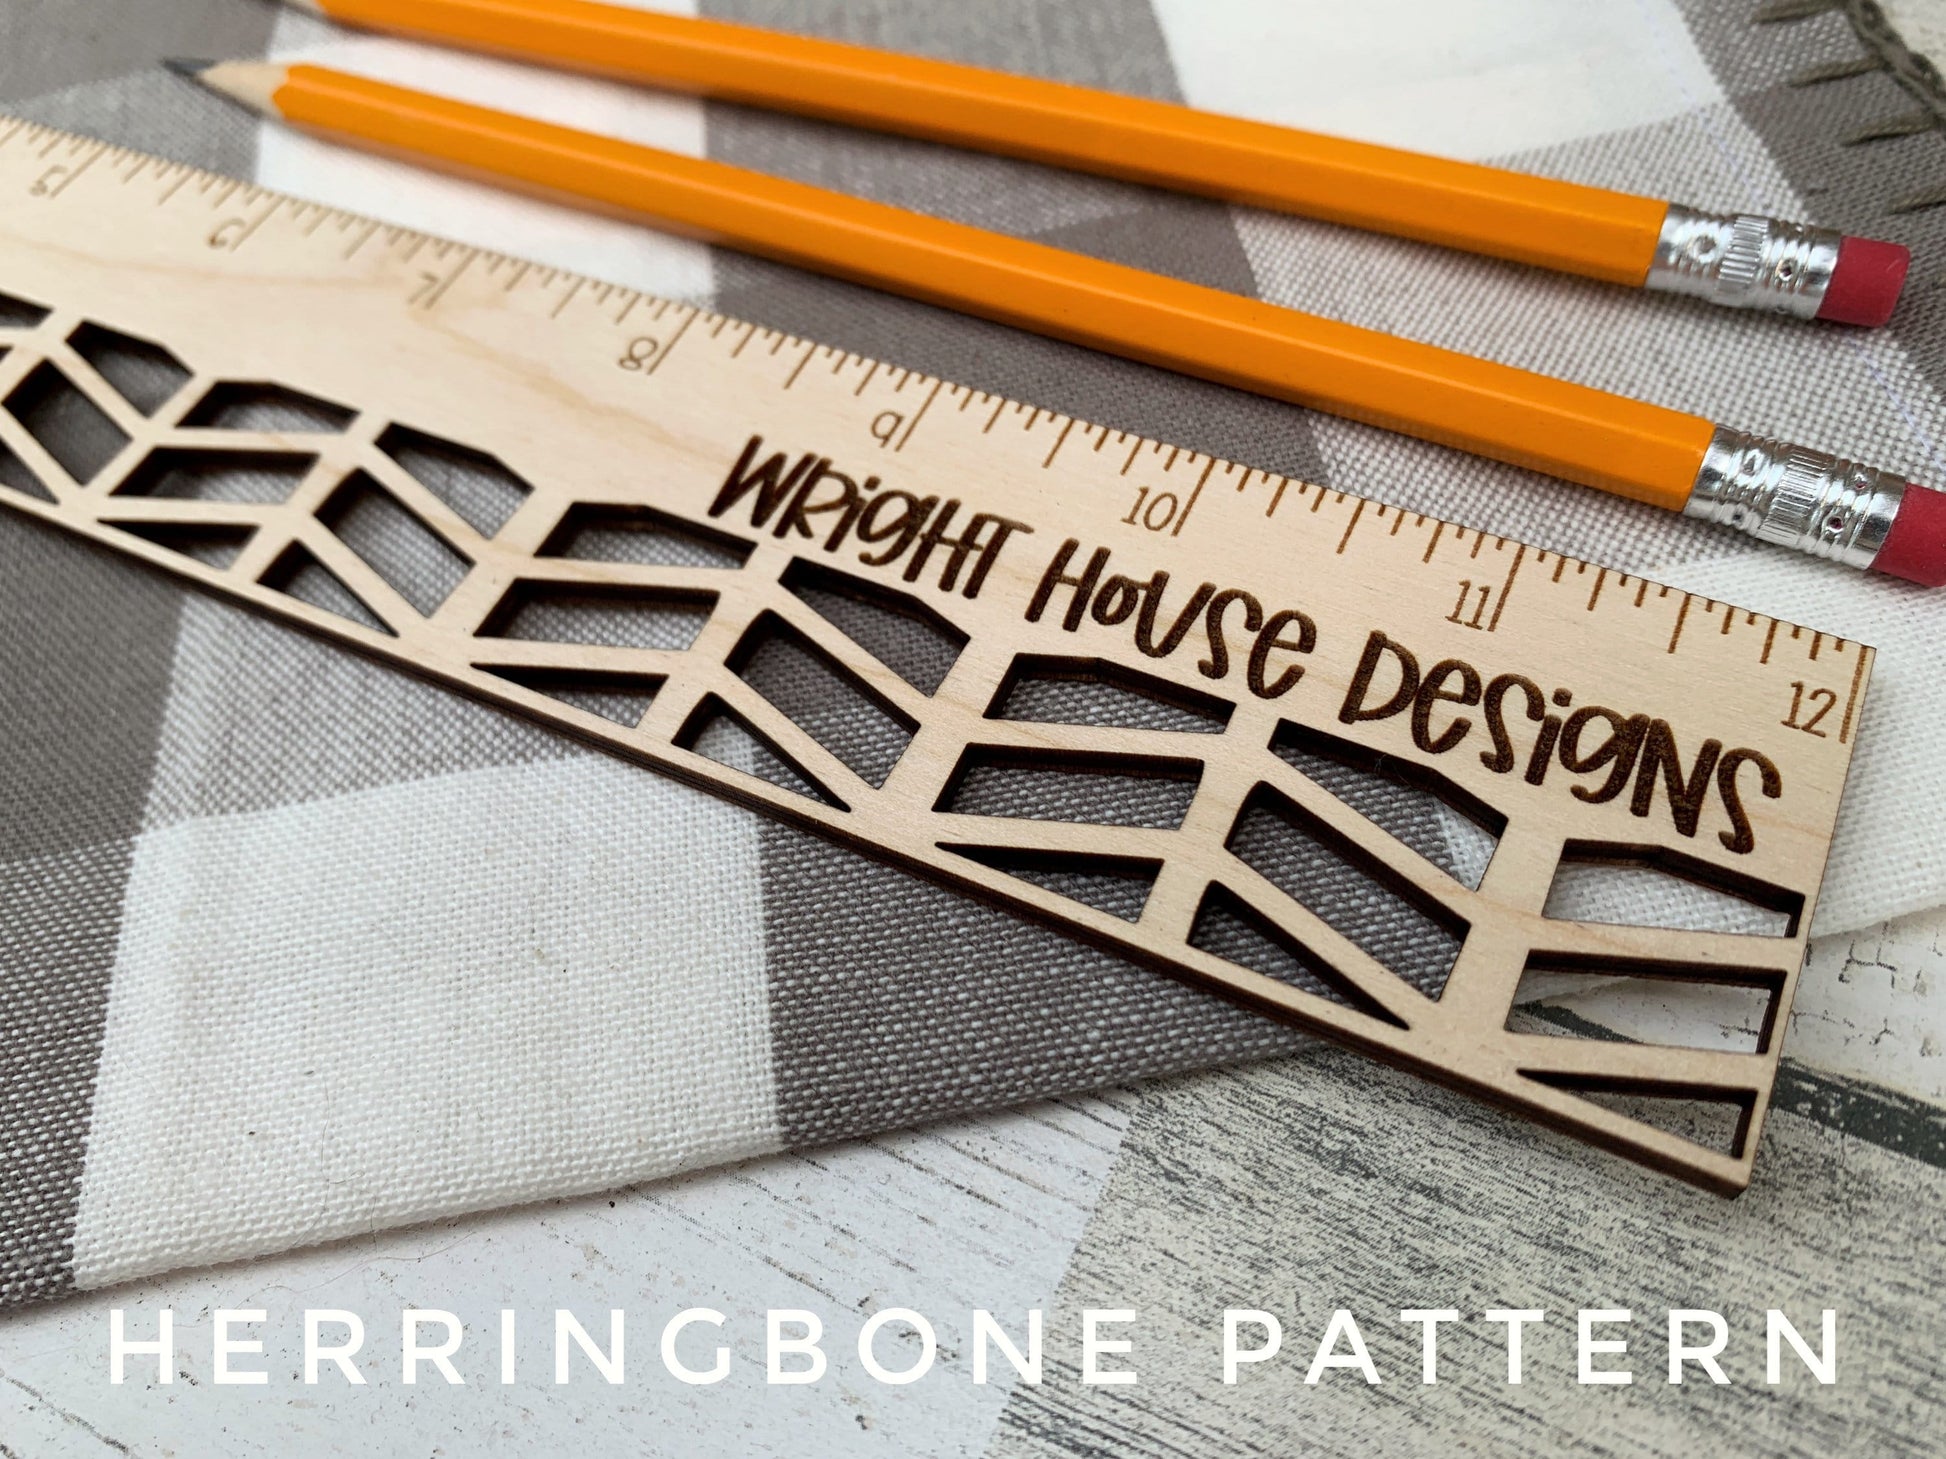 Geometric Pattern Ruler Set For Laser Cutting - Files for Crafters Makers and Product Making - Digital SVG Cut Files For Glowforge Lasers